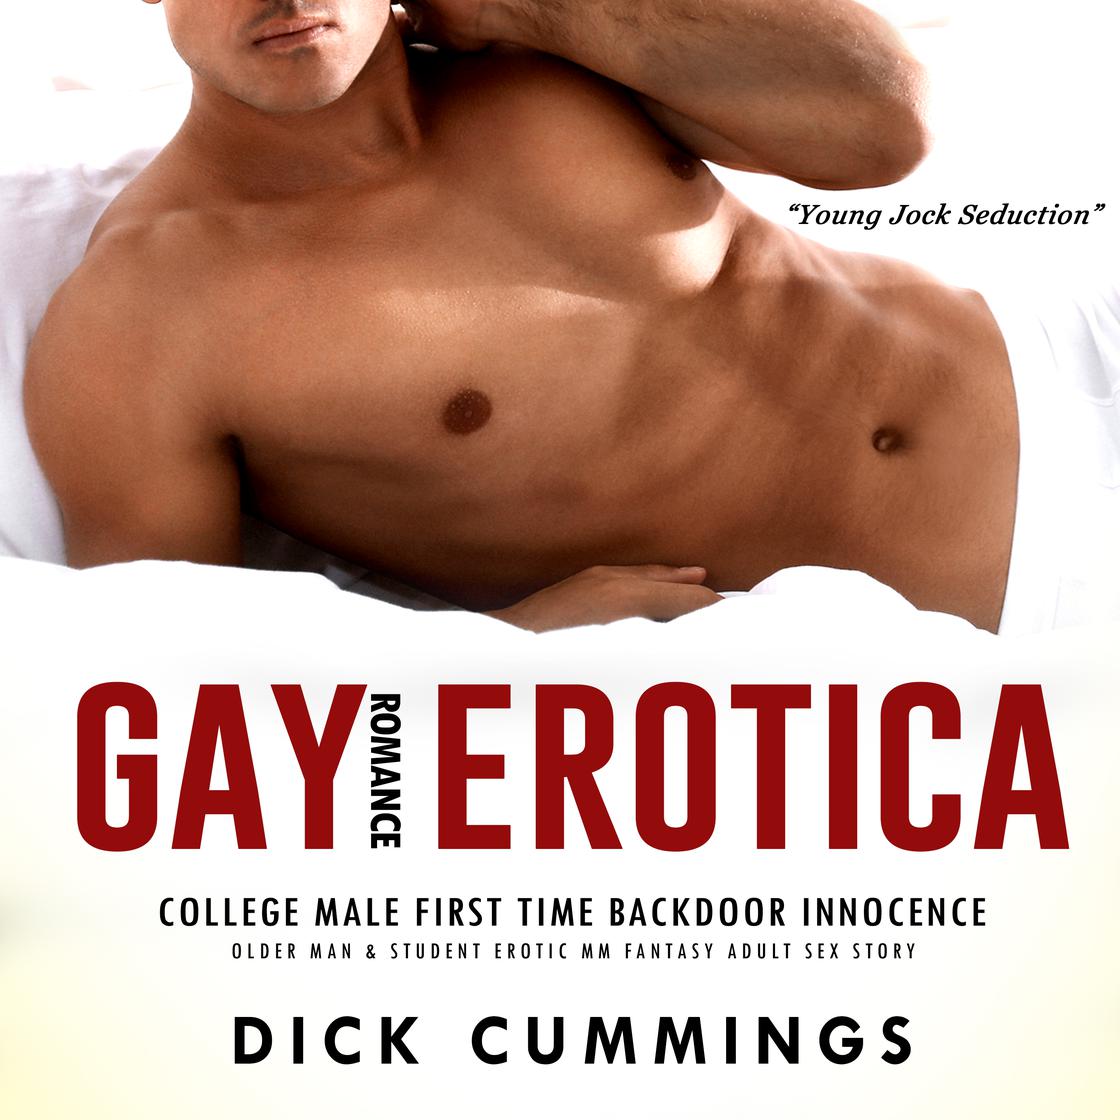 claire louise fletcher recommends Male On Male Erotica